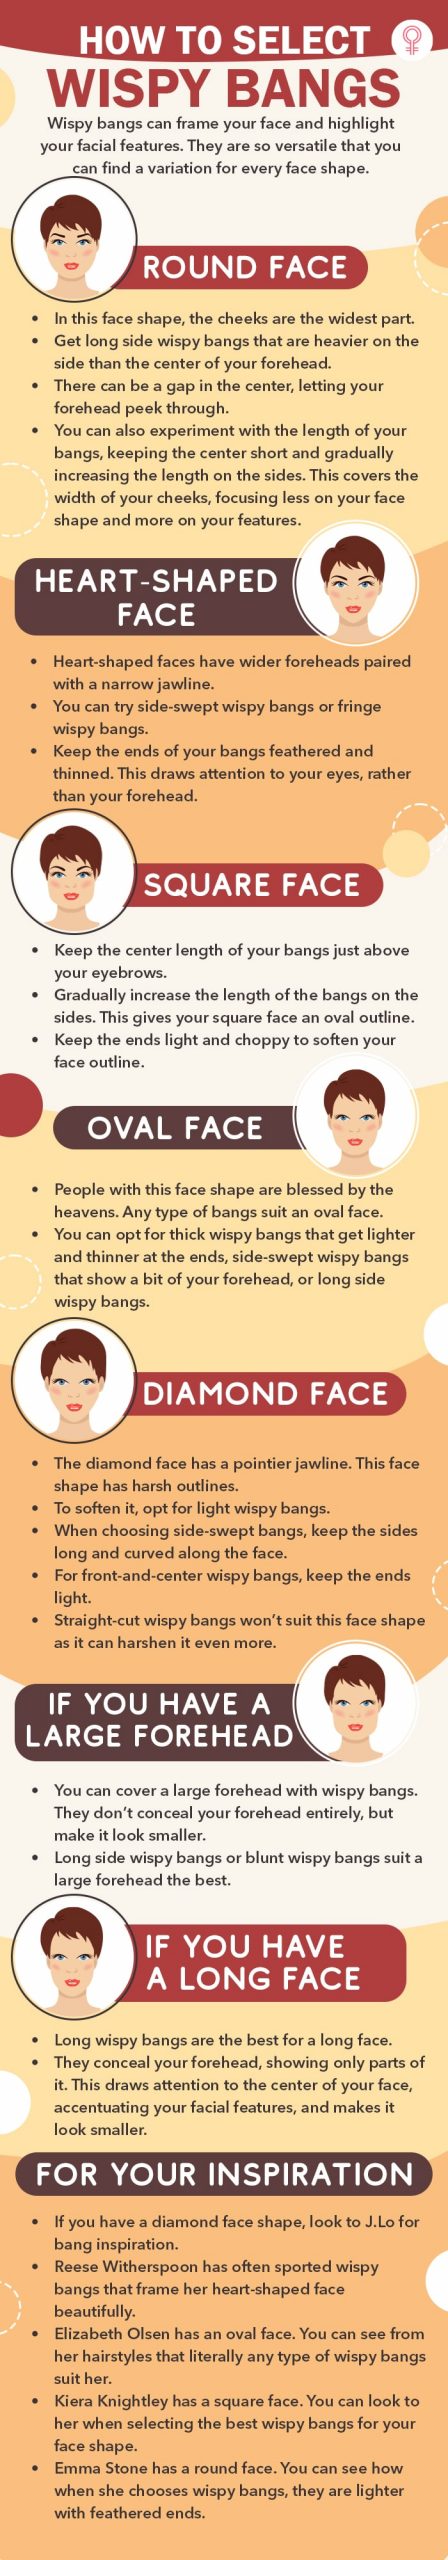 how to select wispy bangs for all face types (infographic)